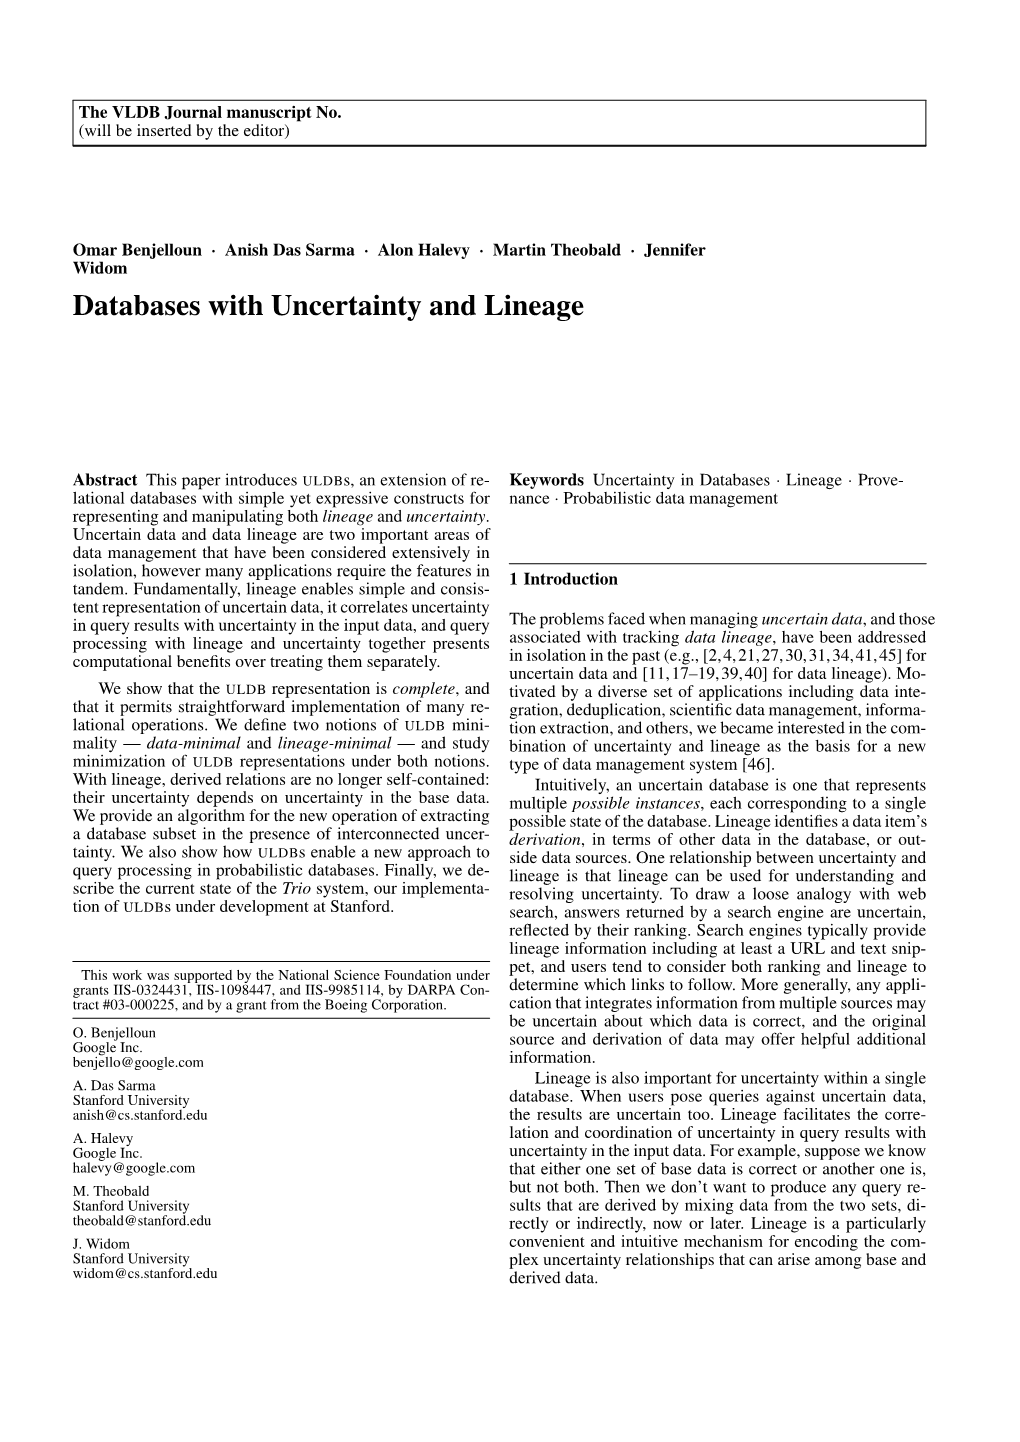 Databases with Uncertainty and Lineage